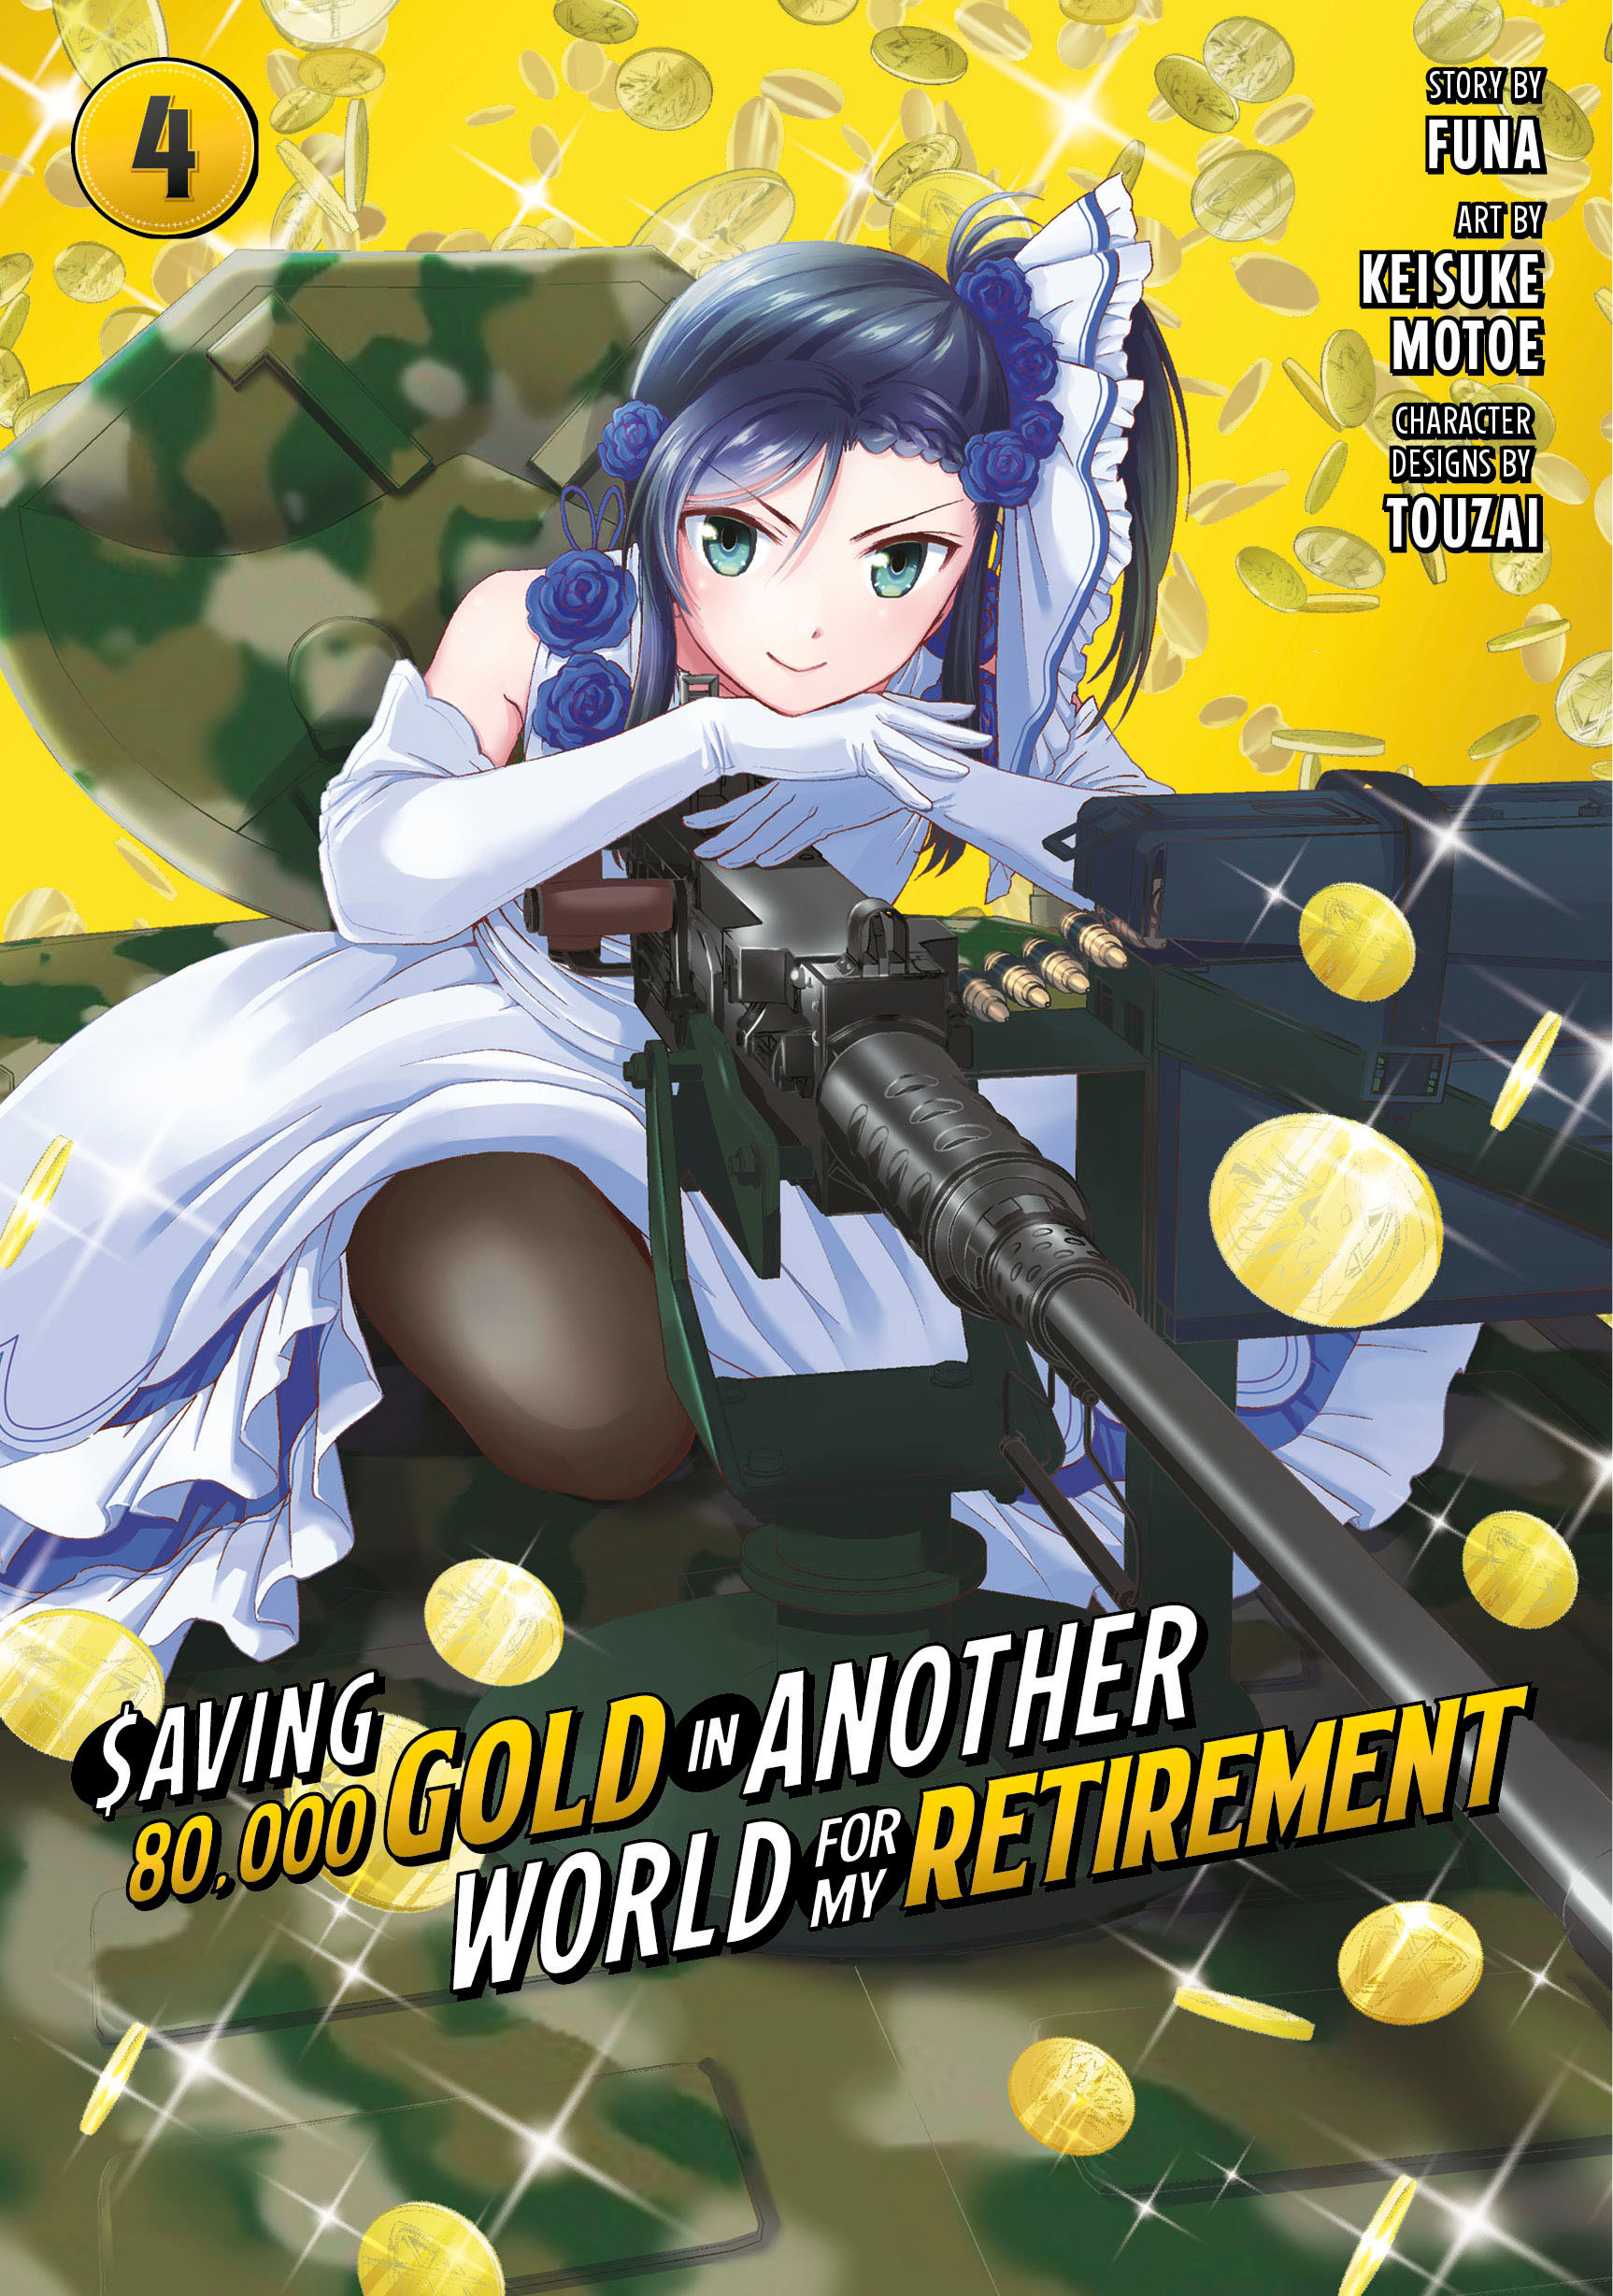 Saving 80,000 Gold in Another World for My Retirement Manga Volume 4